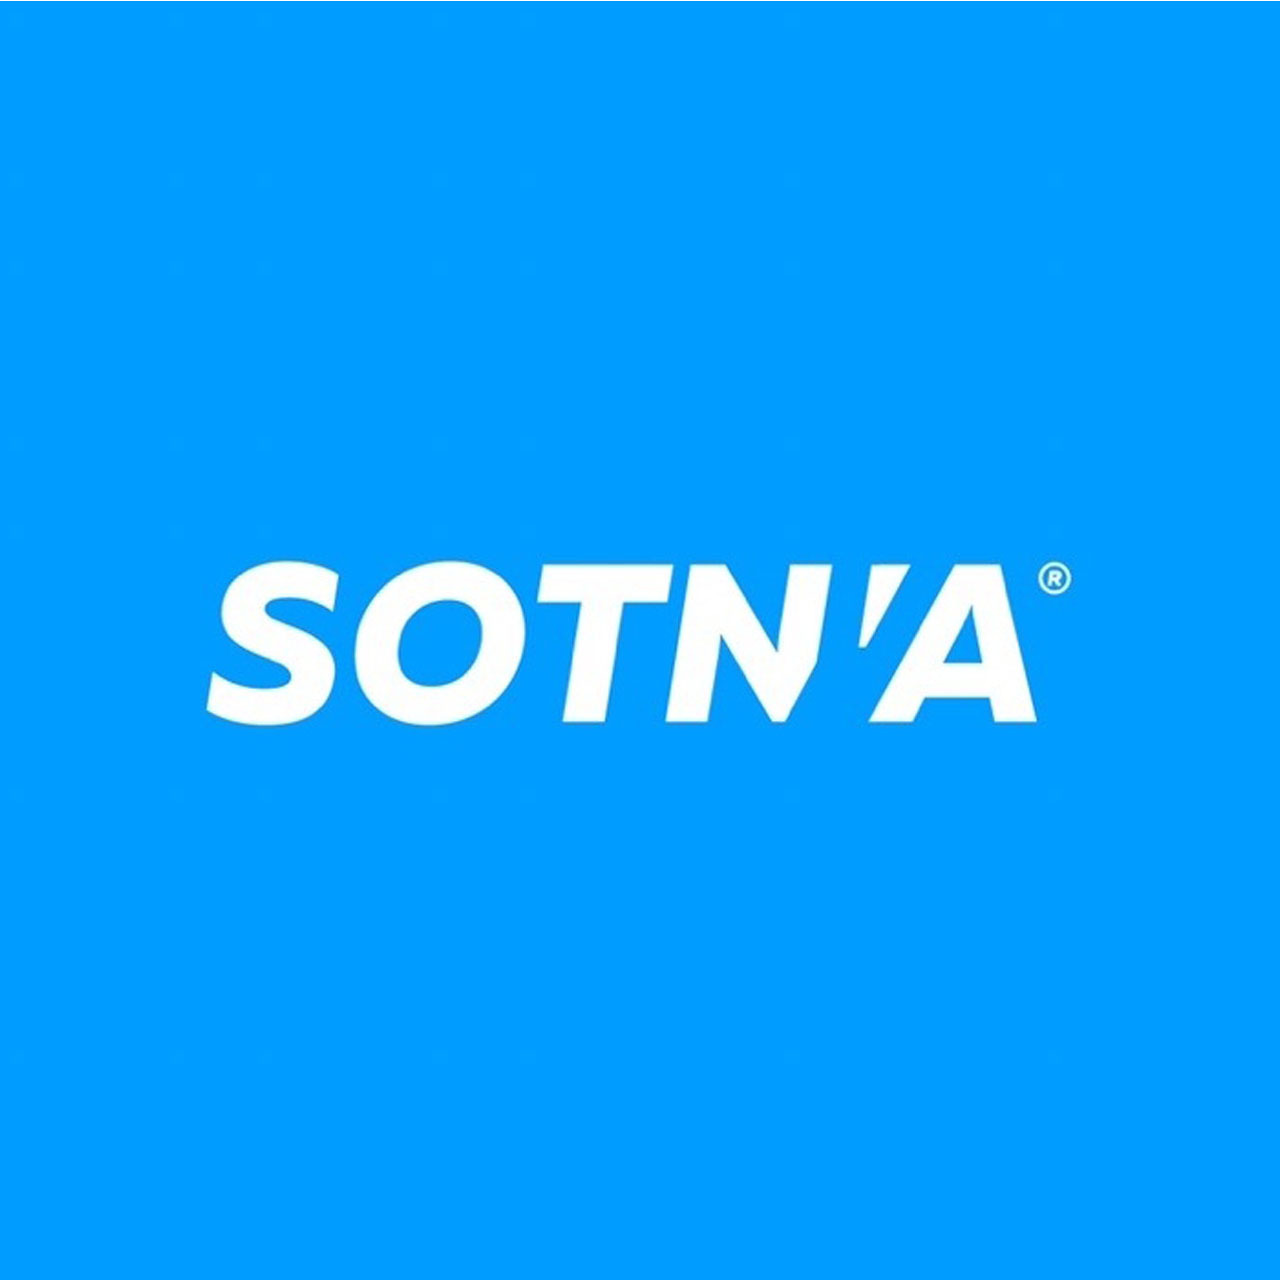 SF by Sonata (@sf.watches) • Instagram photos and videos